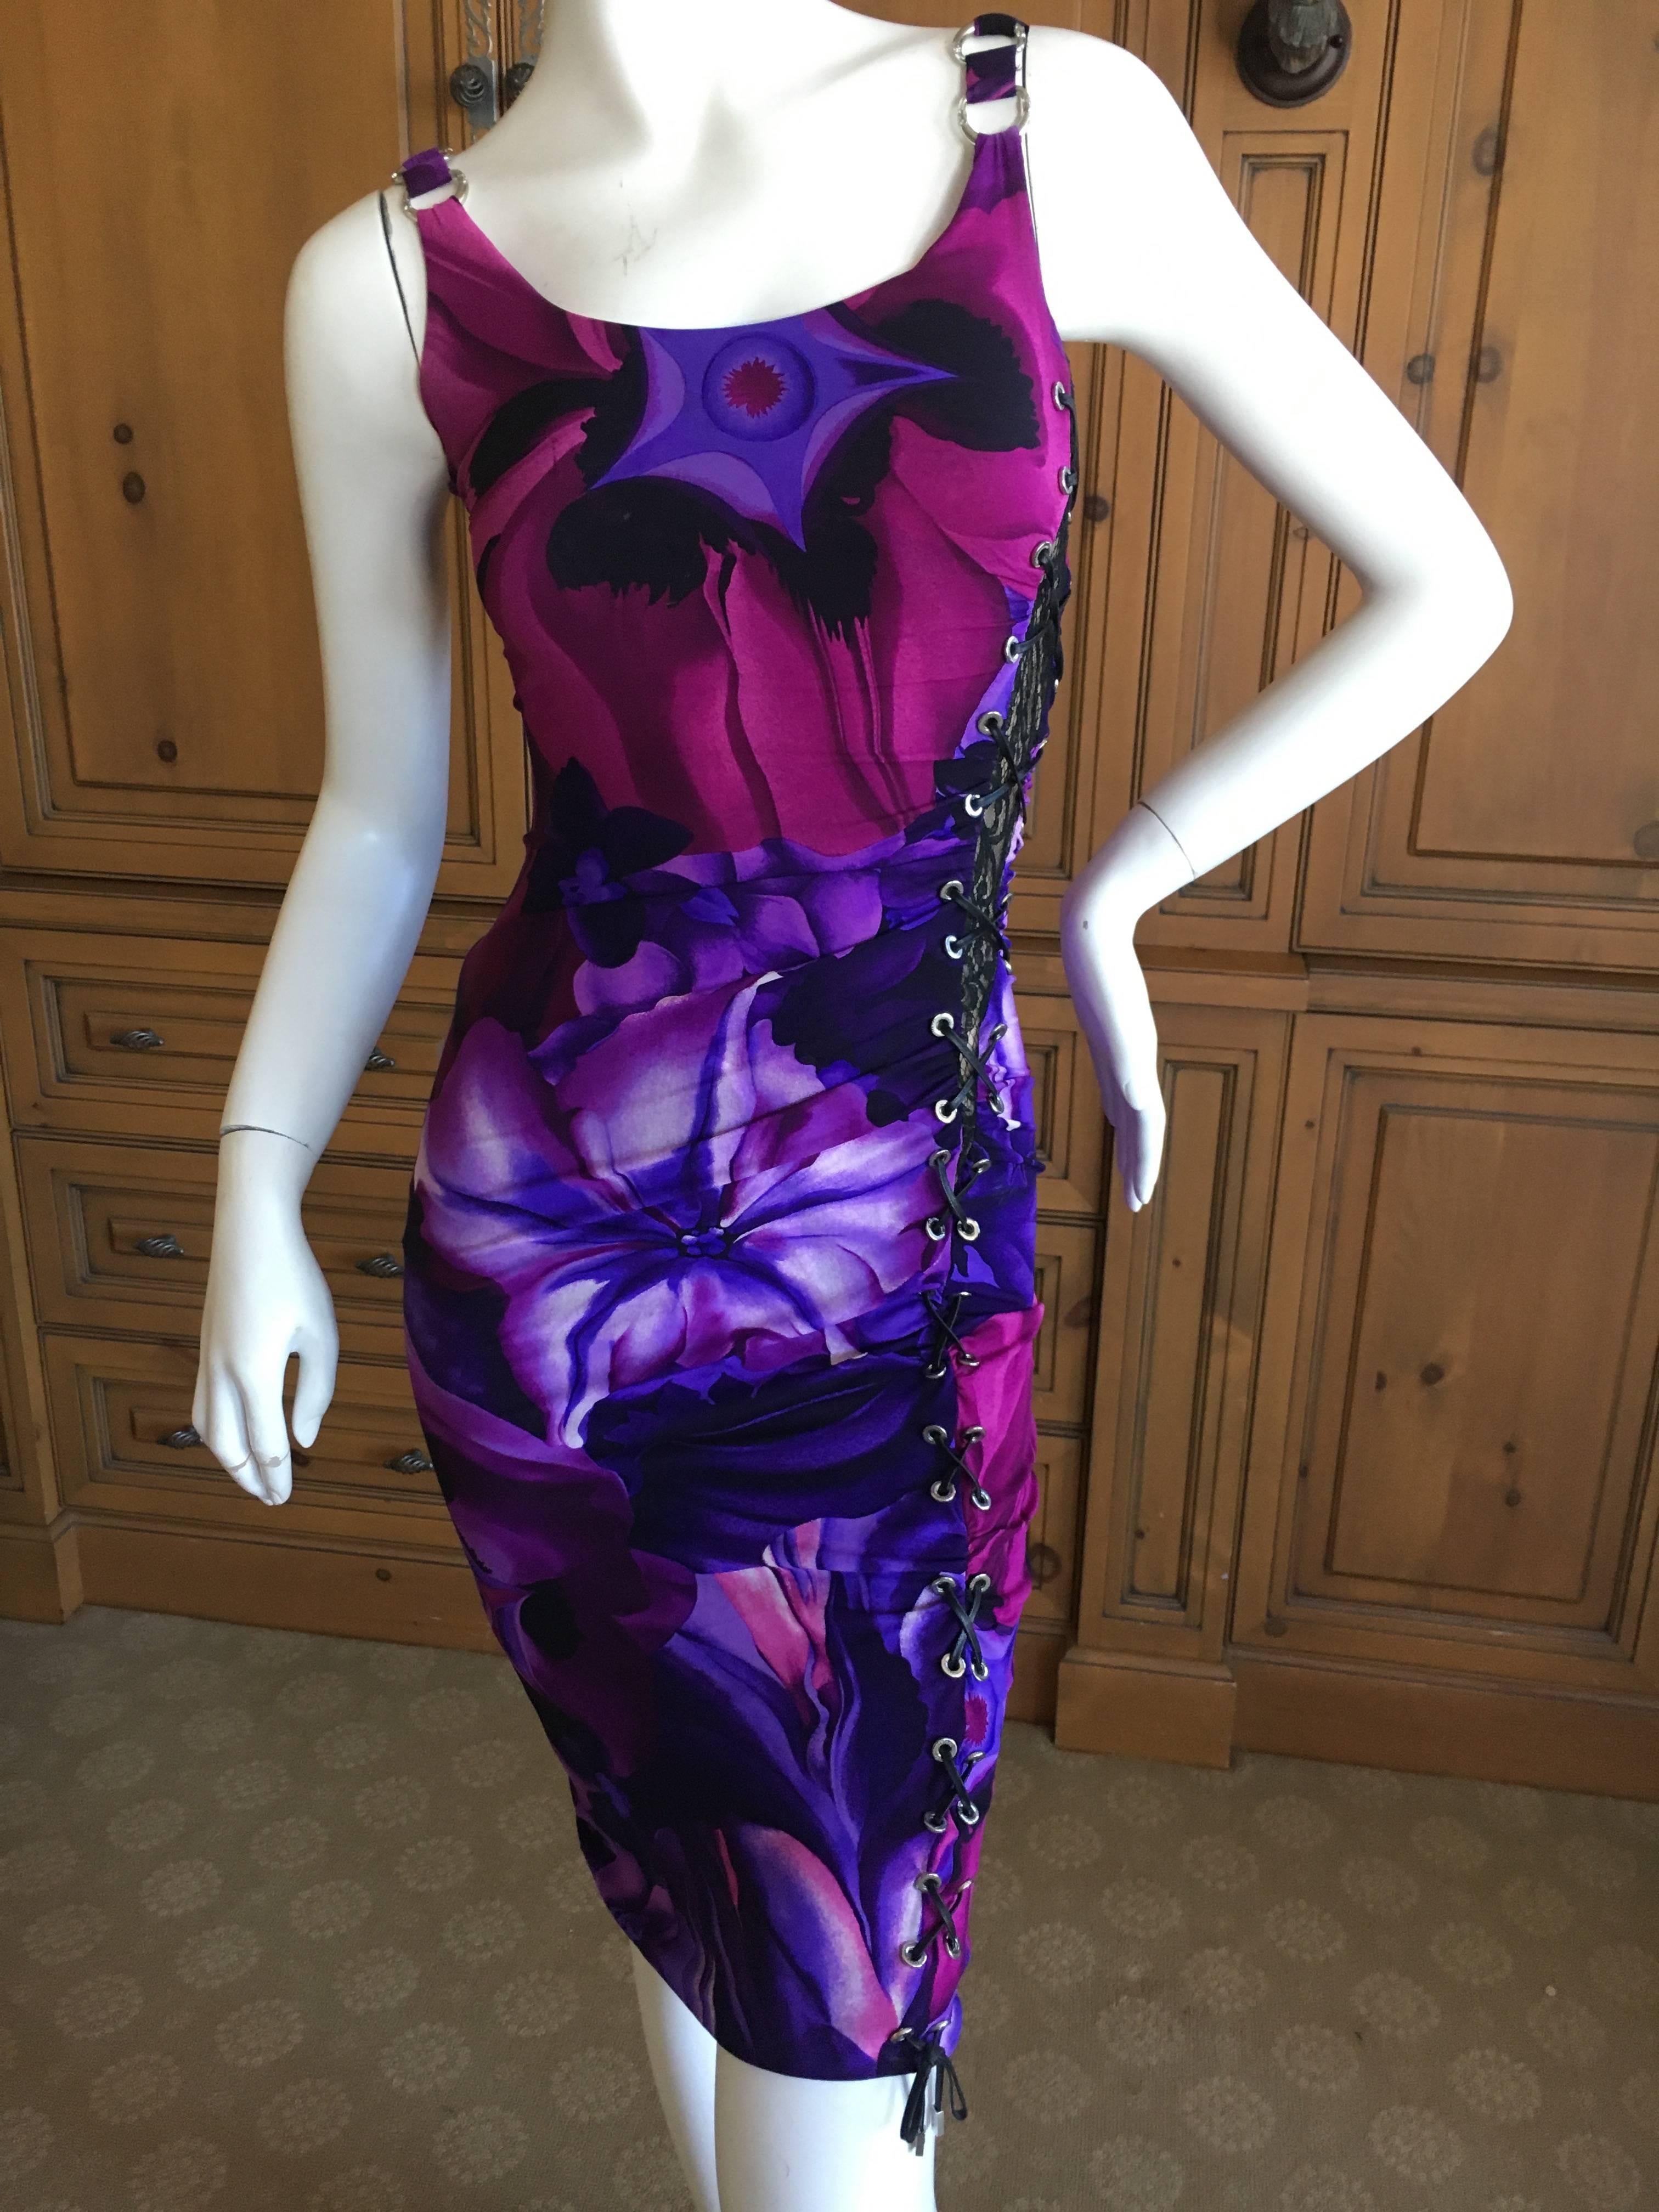 Versace Sexy Floral Dress with Lace Insert and Corset Lacing
Size 38
Bust 36"
Waist 26"
Hips 48"
Length 40"